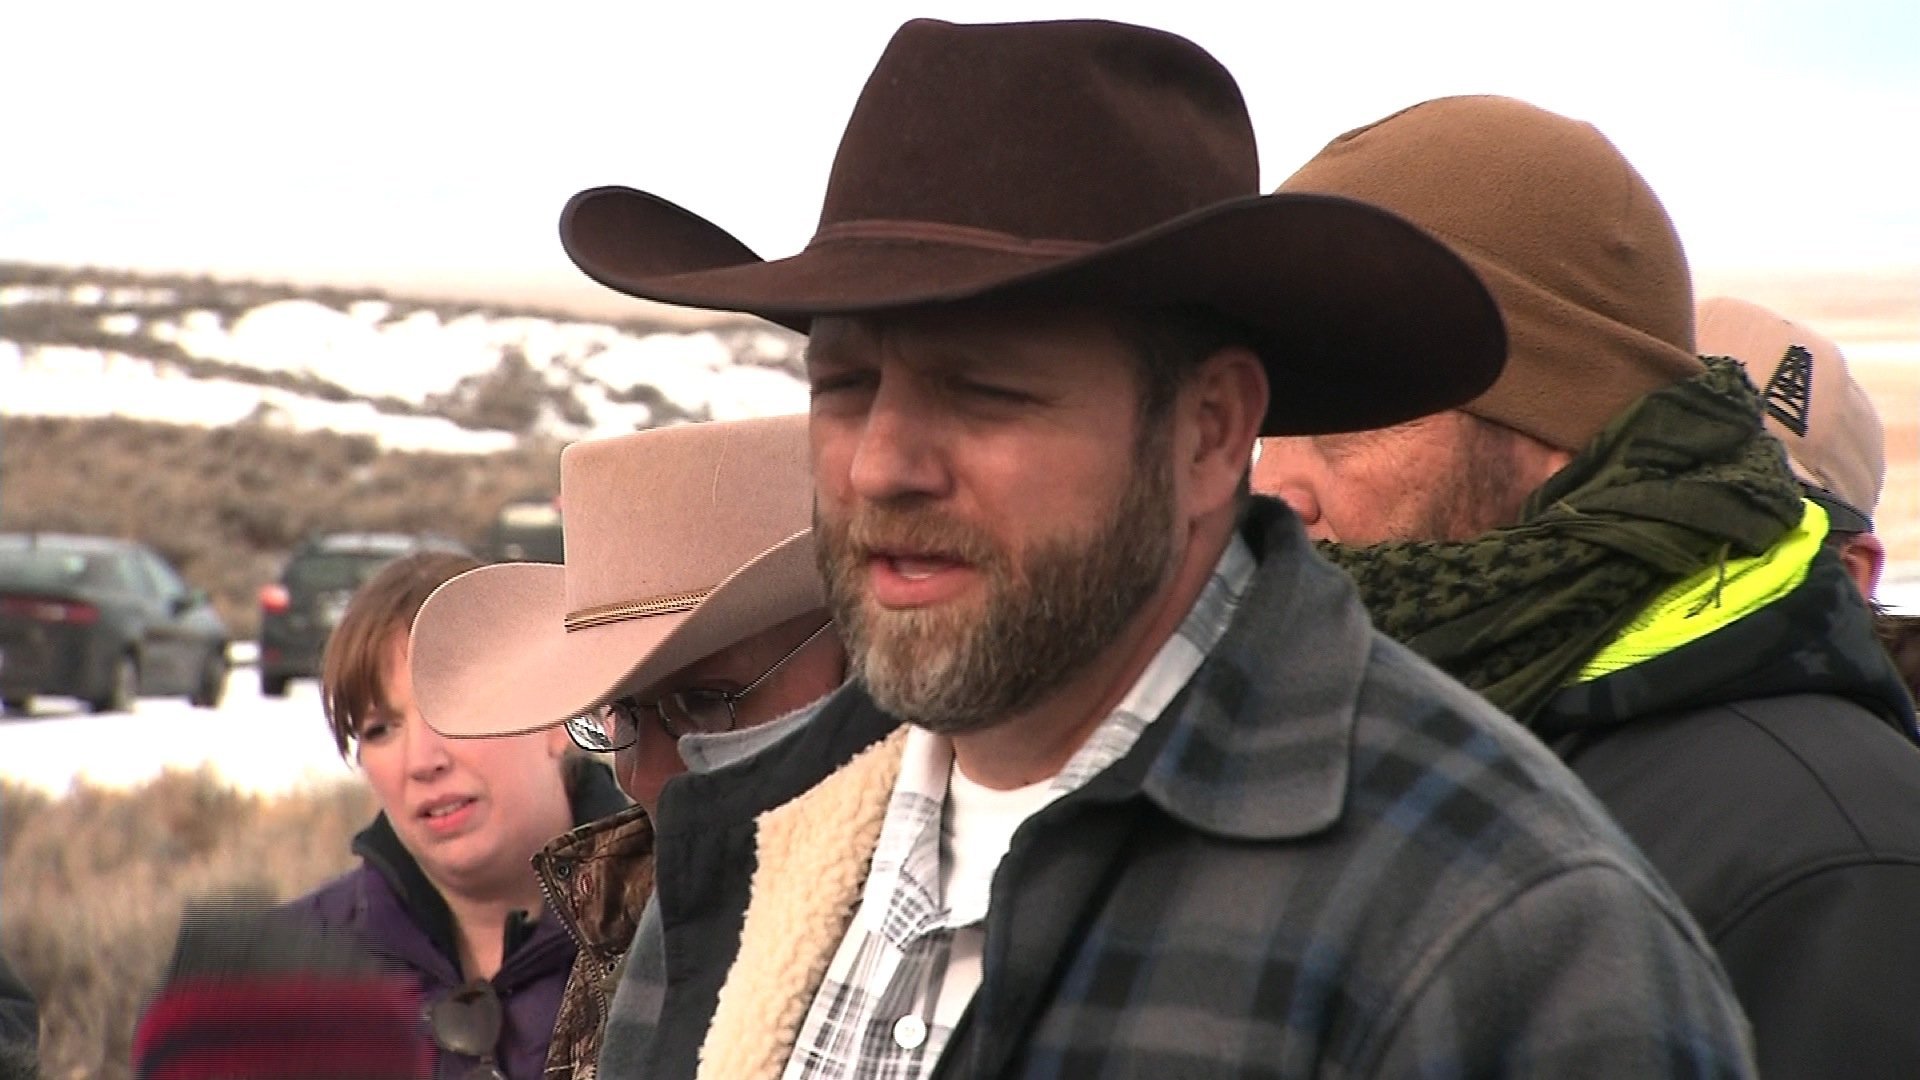 Ammon Bundy, 40, is leading the group of protestors in Oregon that took over a federal refuge center. He is the son of Nevada rancher Cliven Bundy, 67, who engaged in a protracted battled with the Federal Bureau of Land Management over grazing rights for his cattle.